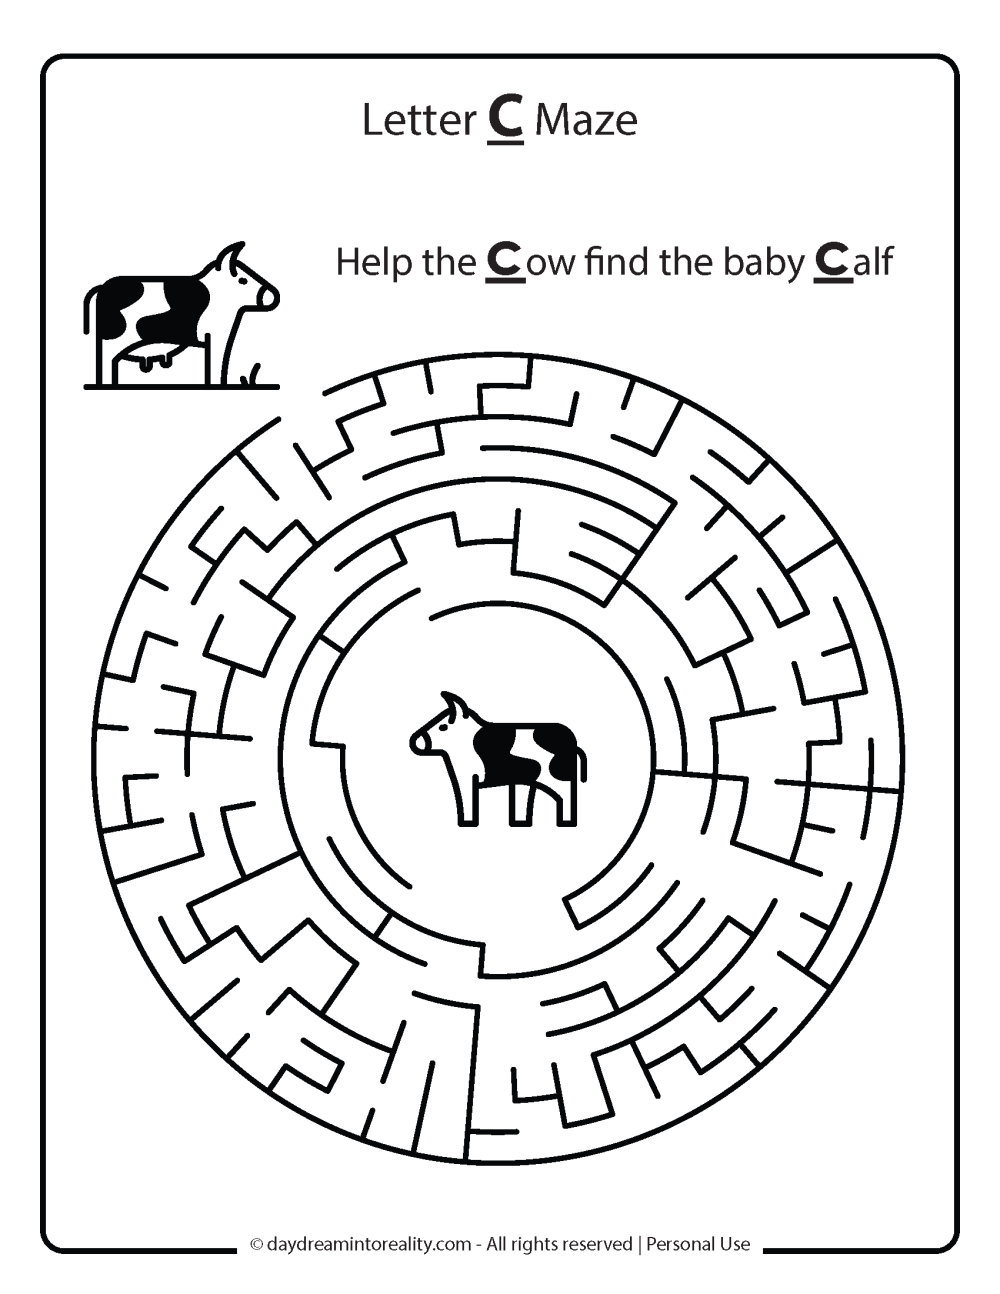 Letter C maze free printable - help the cow find the baby calf